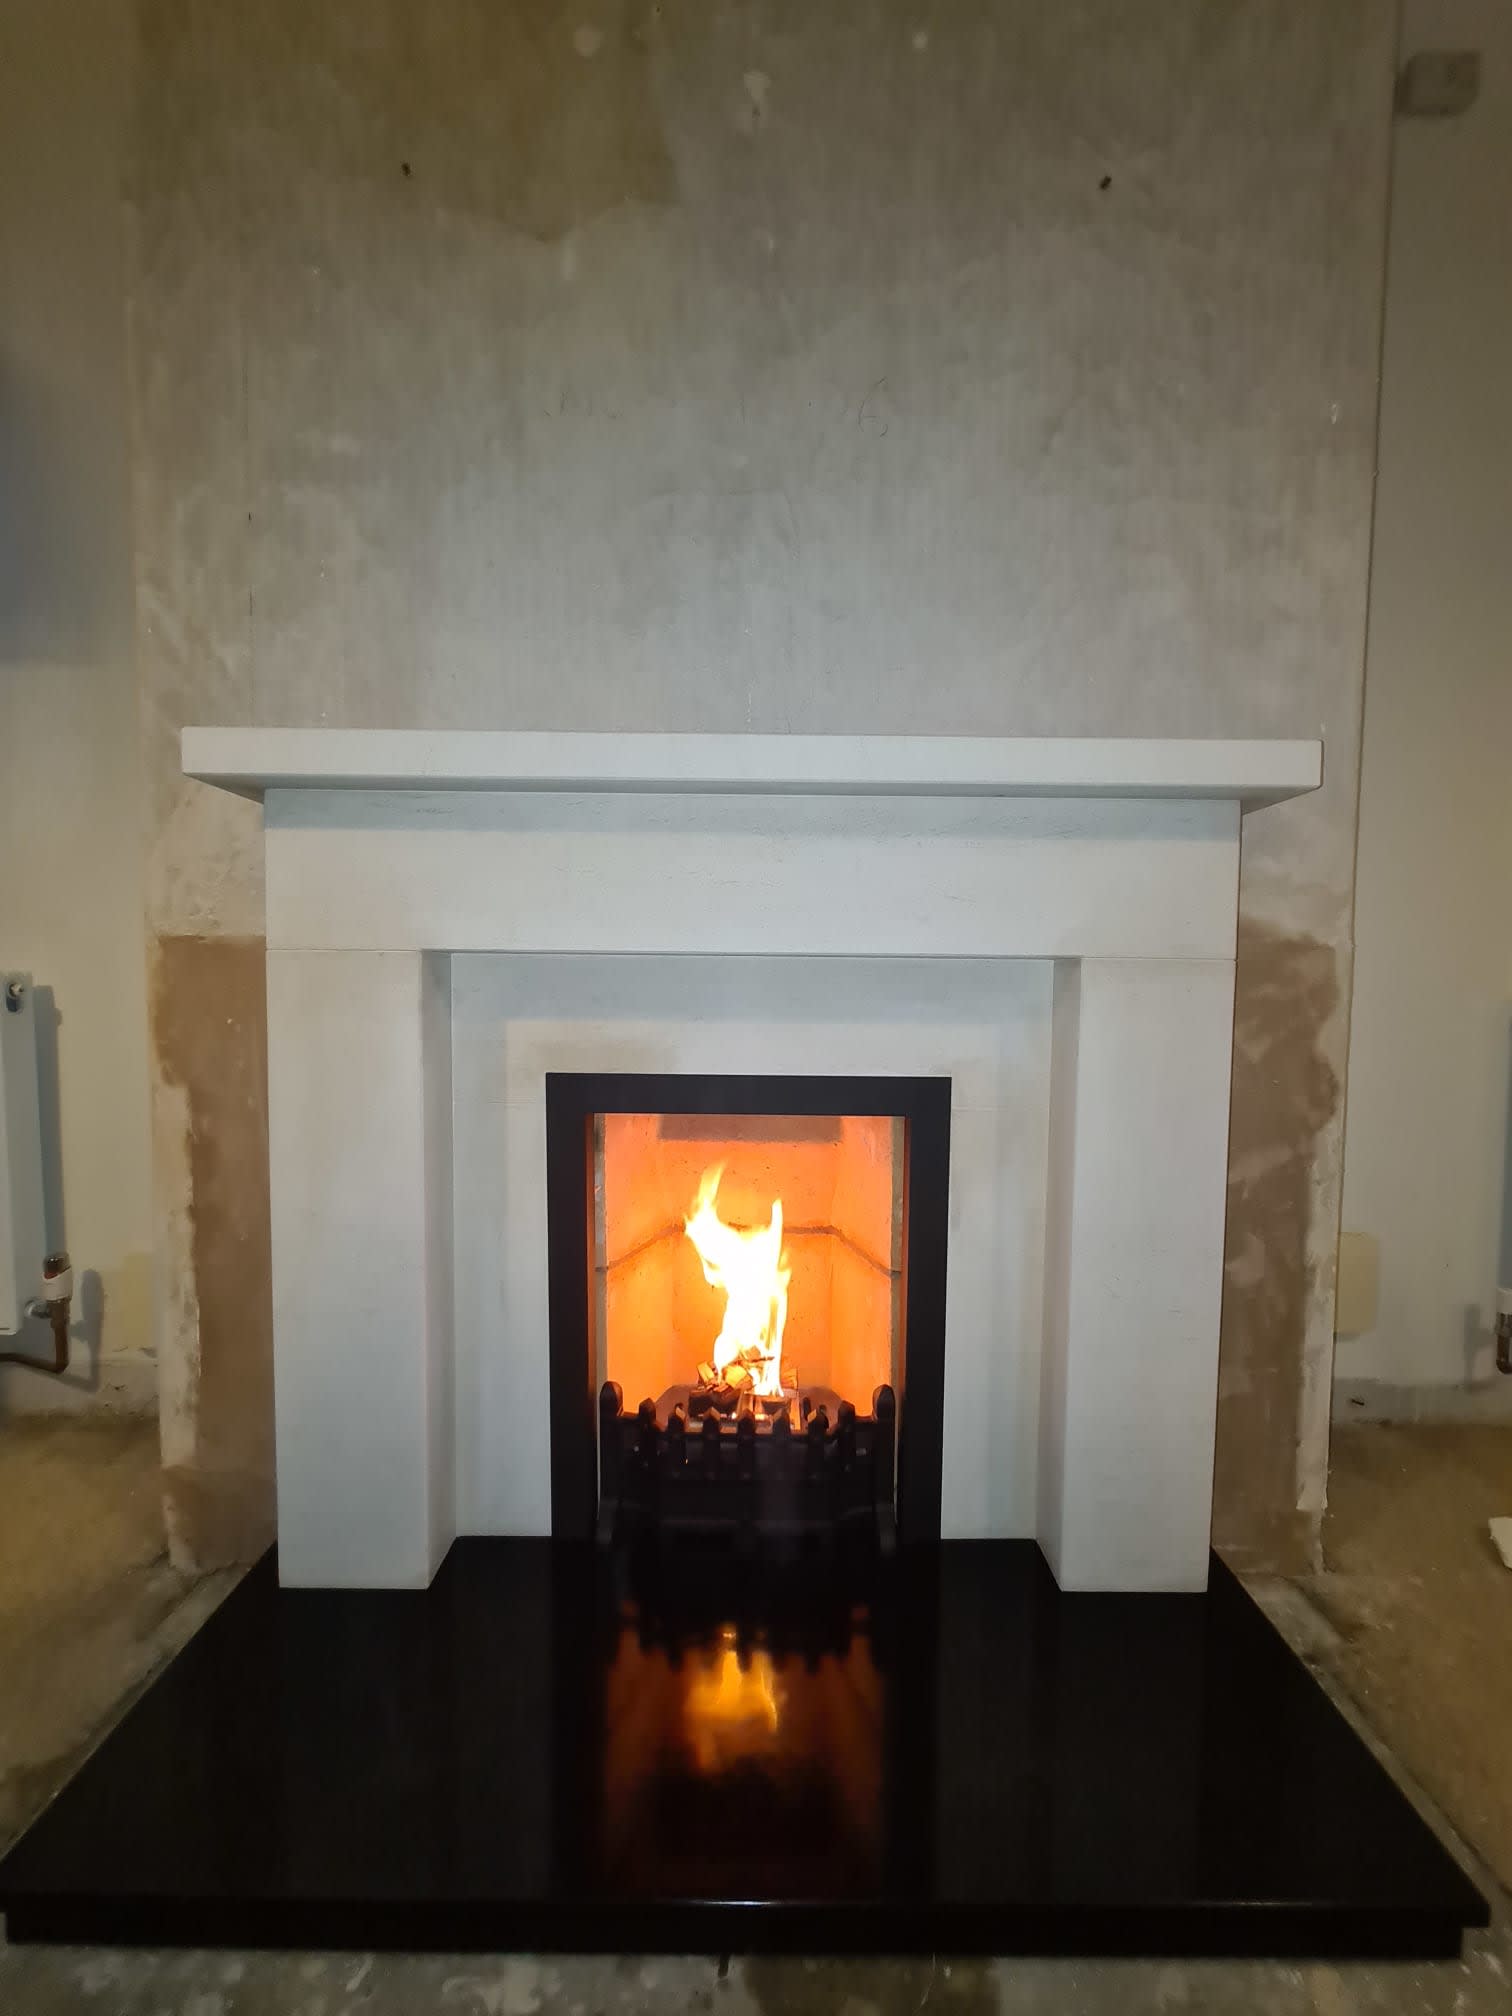 Images The Fireplace Room Ltd